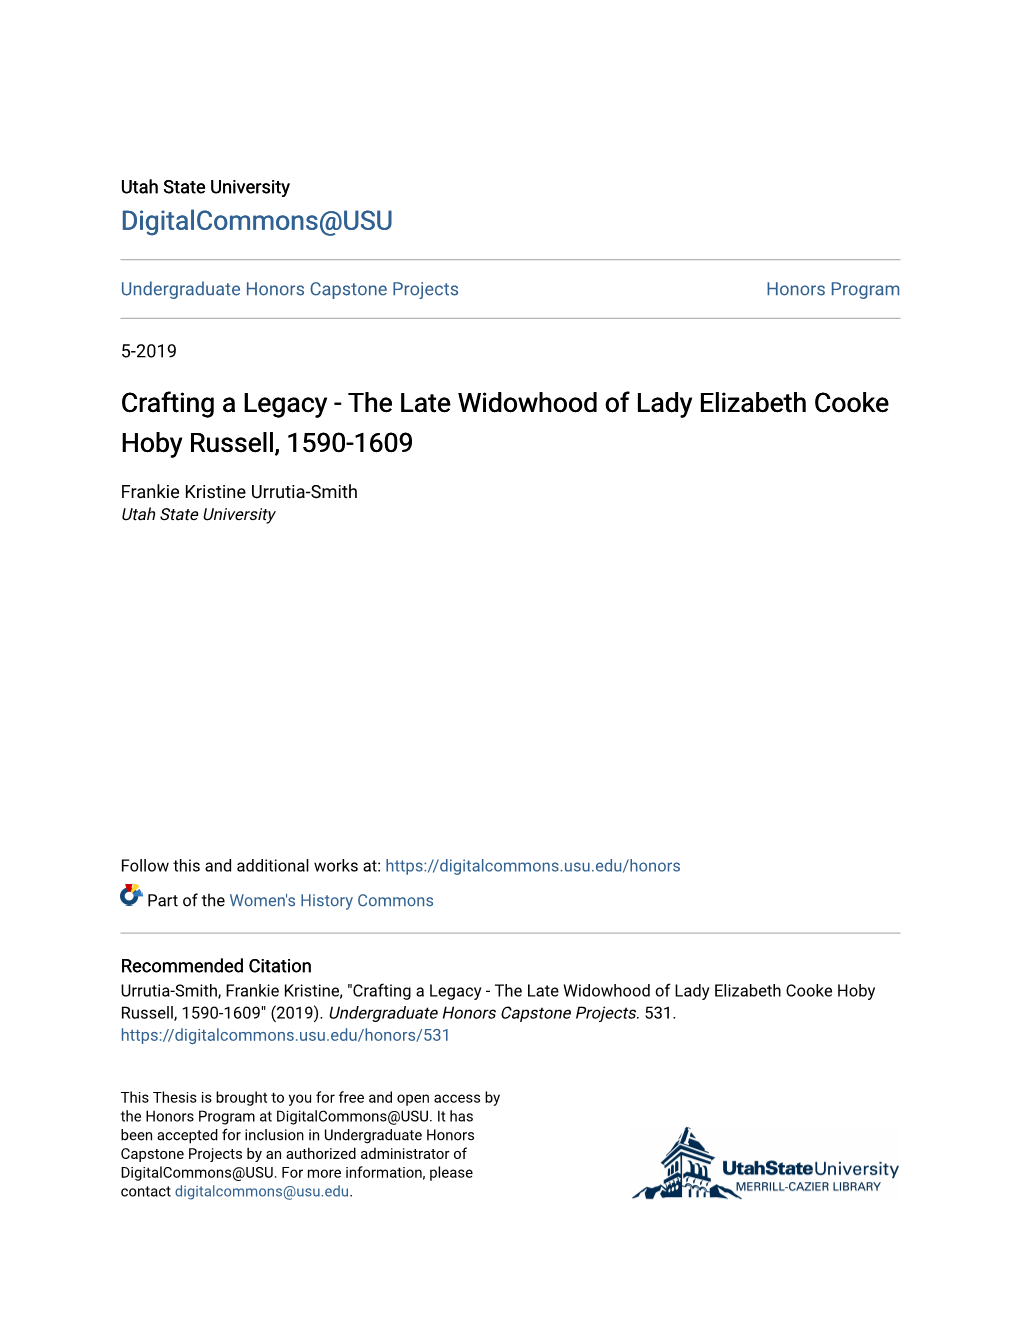 The Late Widowhood of Lady Elizabeth Cooke Hoby Russell, 1590-1609